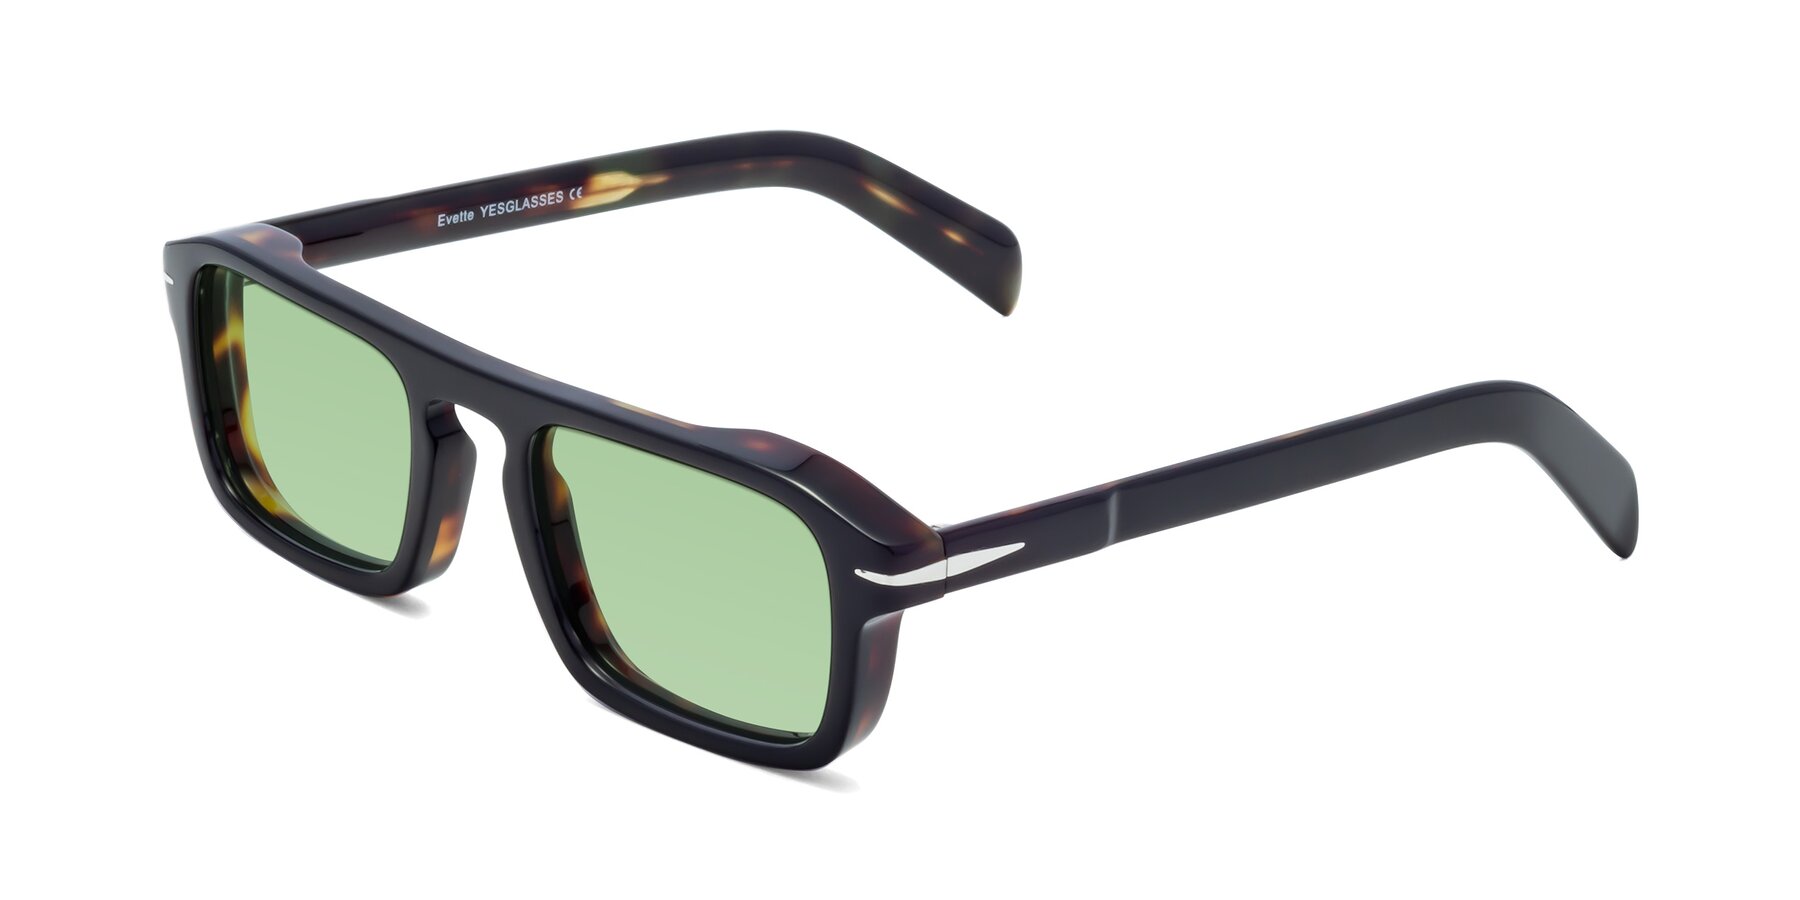 Angle of Evette in Black-Tortoise with Medium Green Tinted Lenses